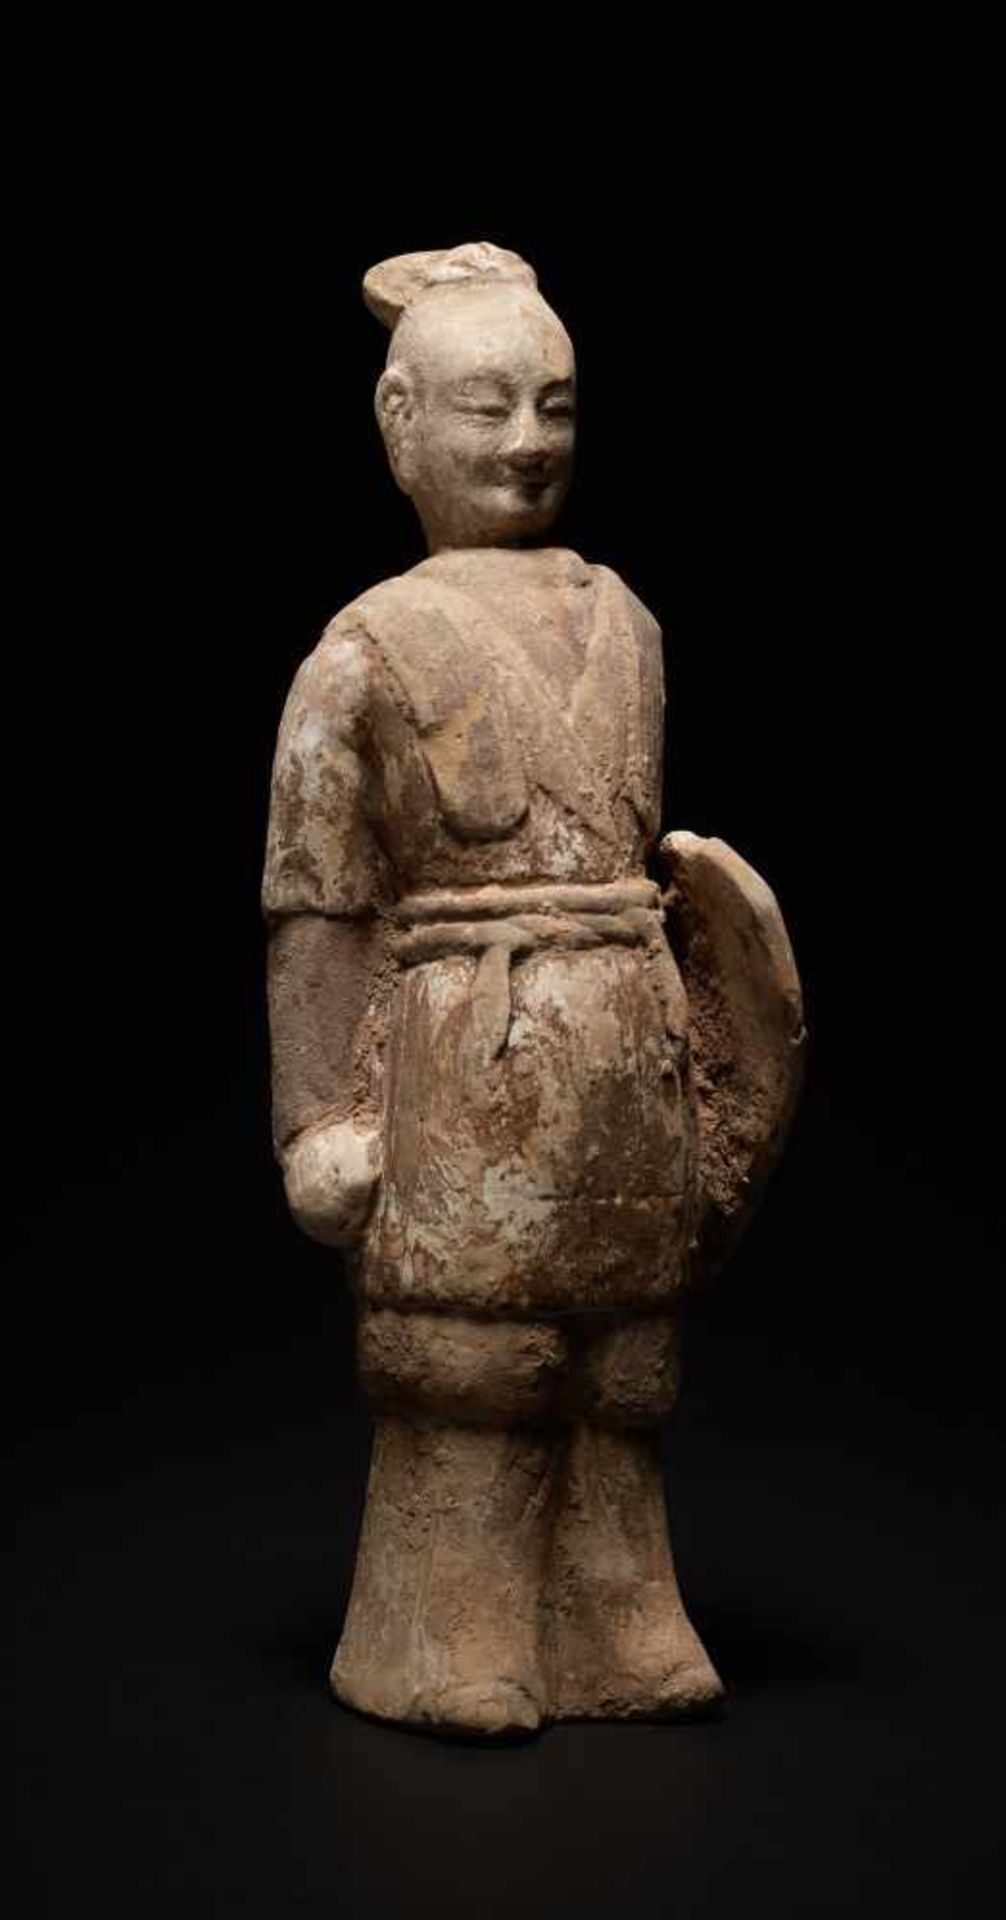 WARRIOR WITH SHIELD Terracotta with painting. China, Northern Qi Dynasty (550 - 589) Figurine with